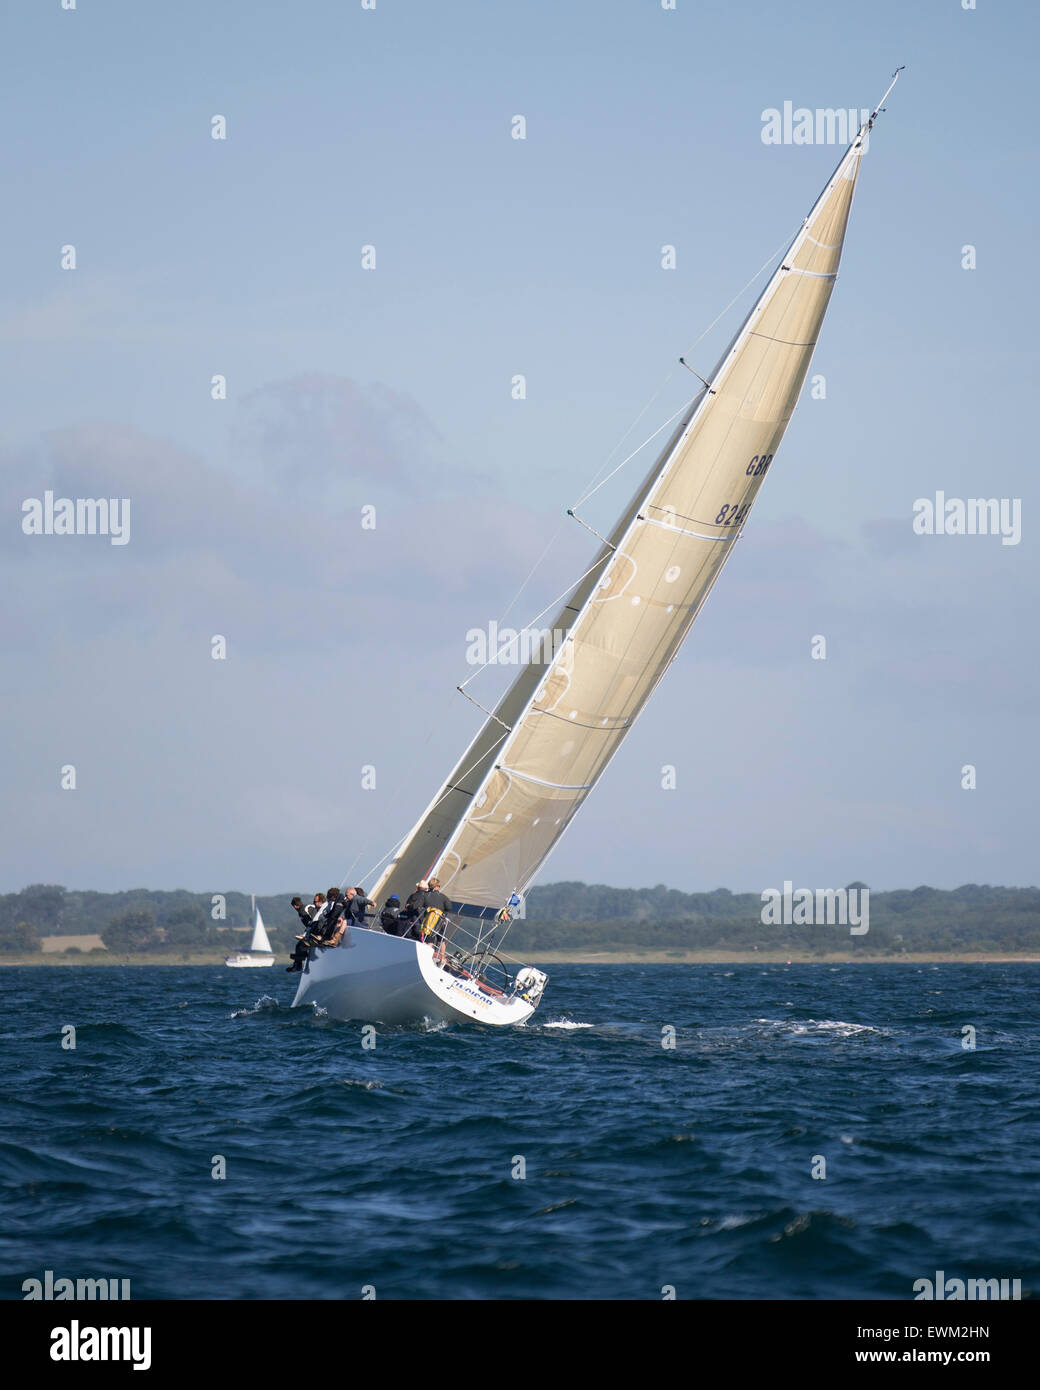 UK. 27th June, 2015. Corby 45 yacht GBR 8248 'Incisor' taking part in the 2015 Round the Island Race Credit:  Niall Ferguson/Alamy Live News Stock Photo